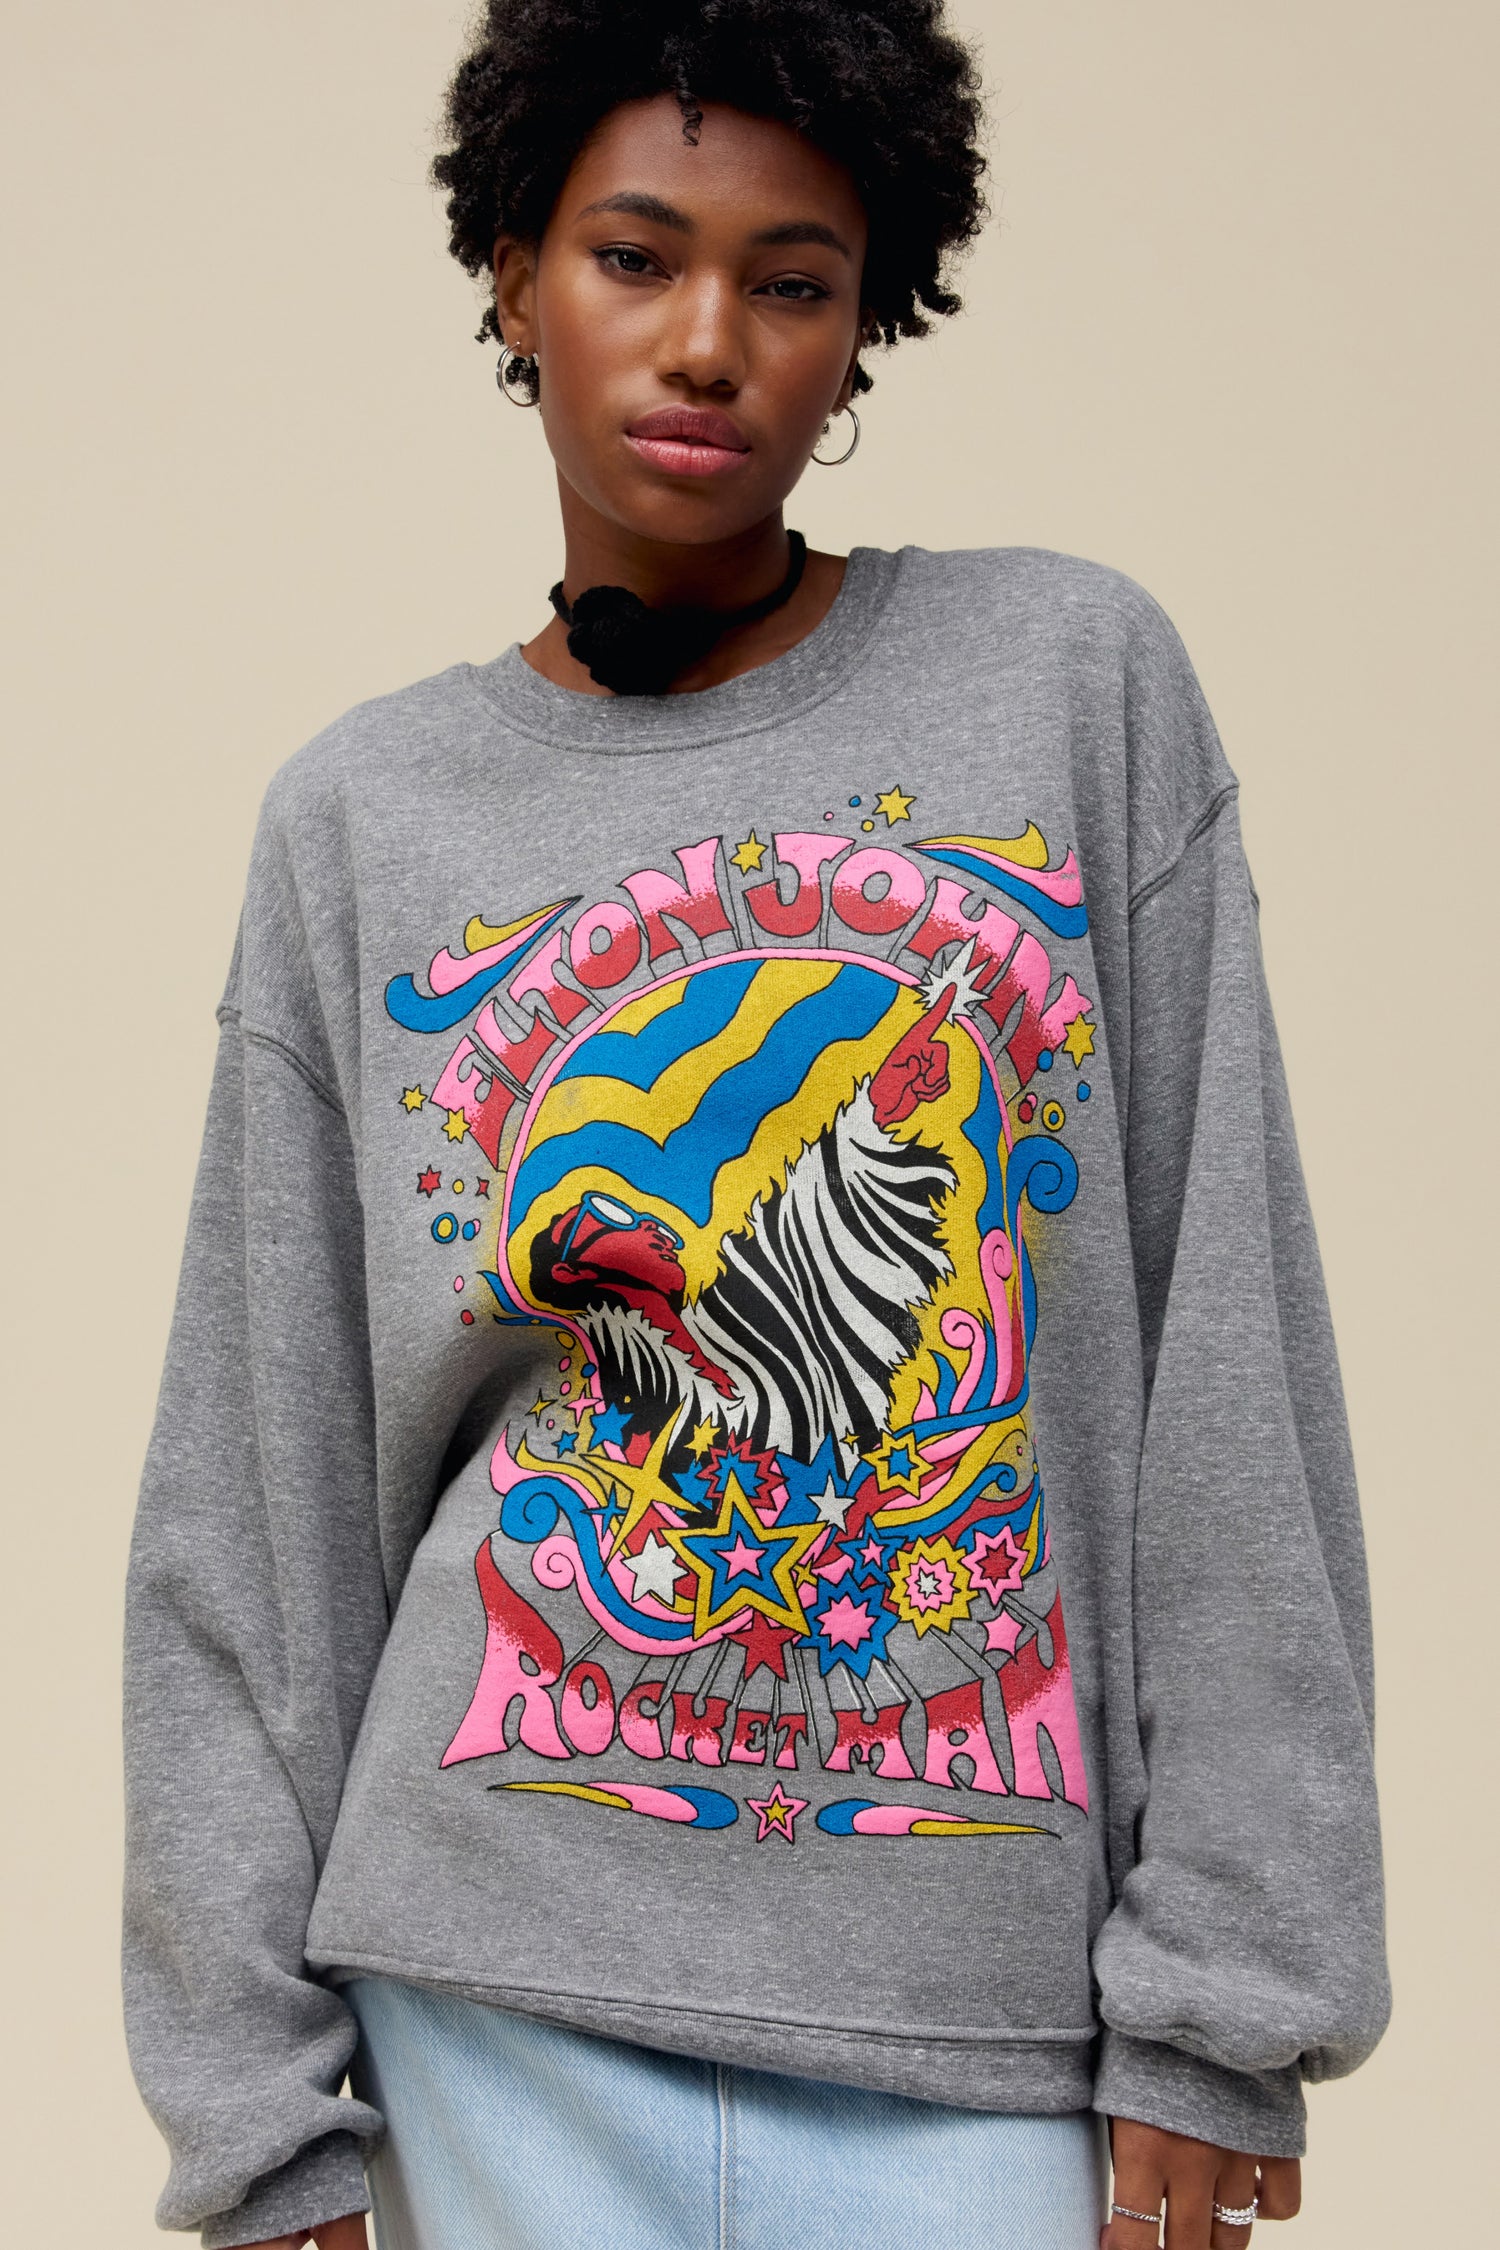 A model featuring a gray long sleeve stamped with Elton John and a graphic of a man and stars.